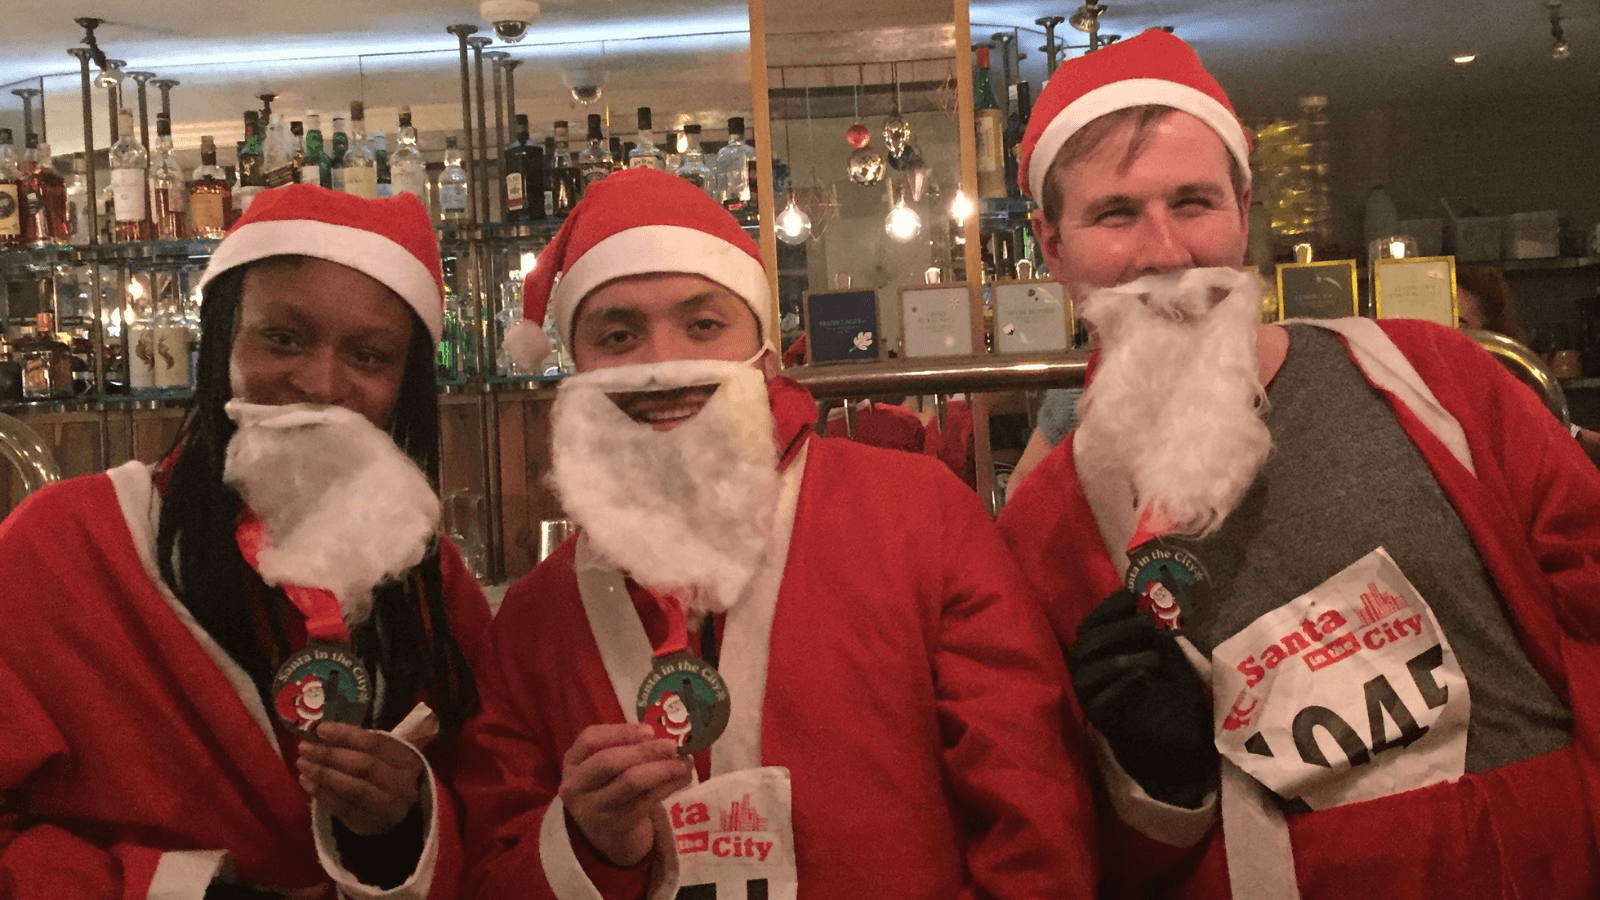 A woman and two men dressed as Father Christmas looking at the camera holding medals